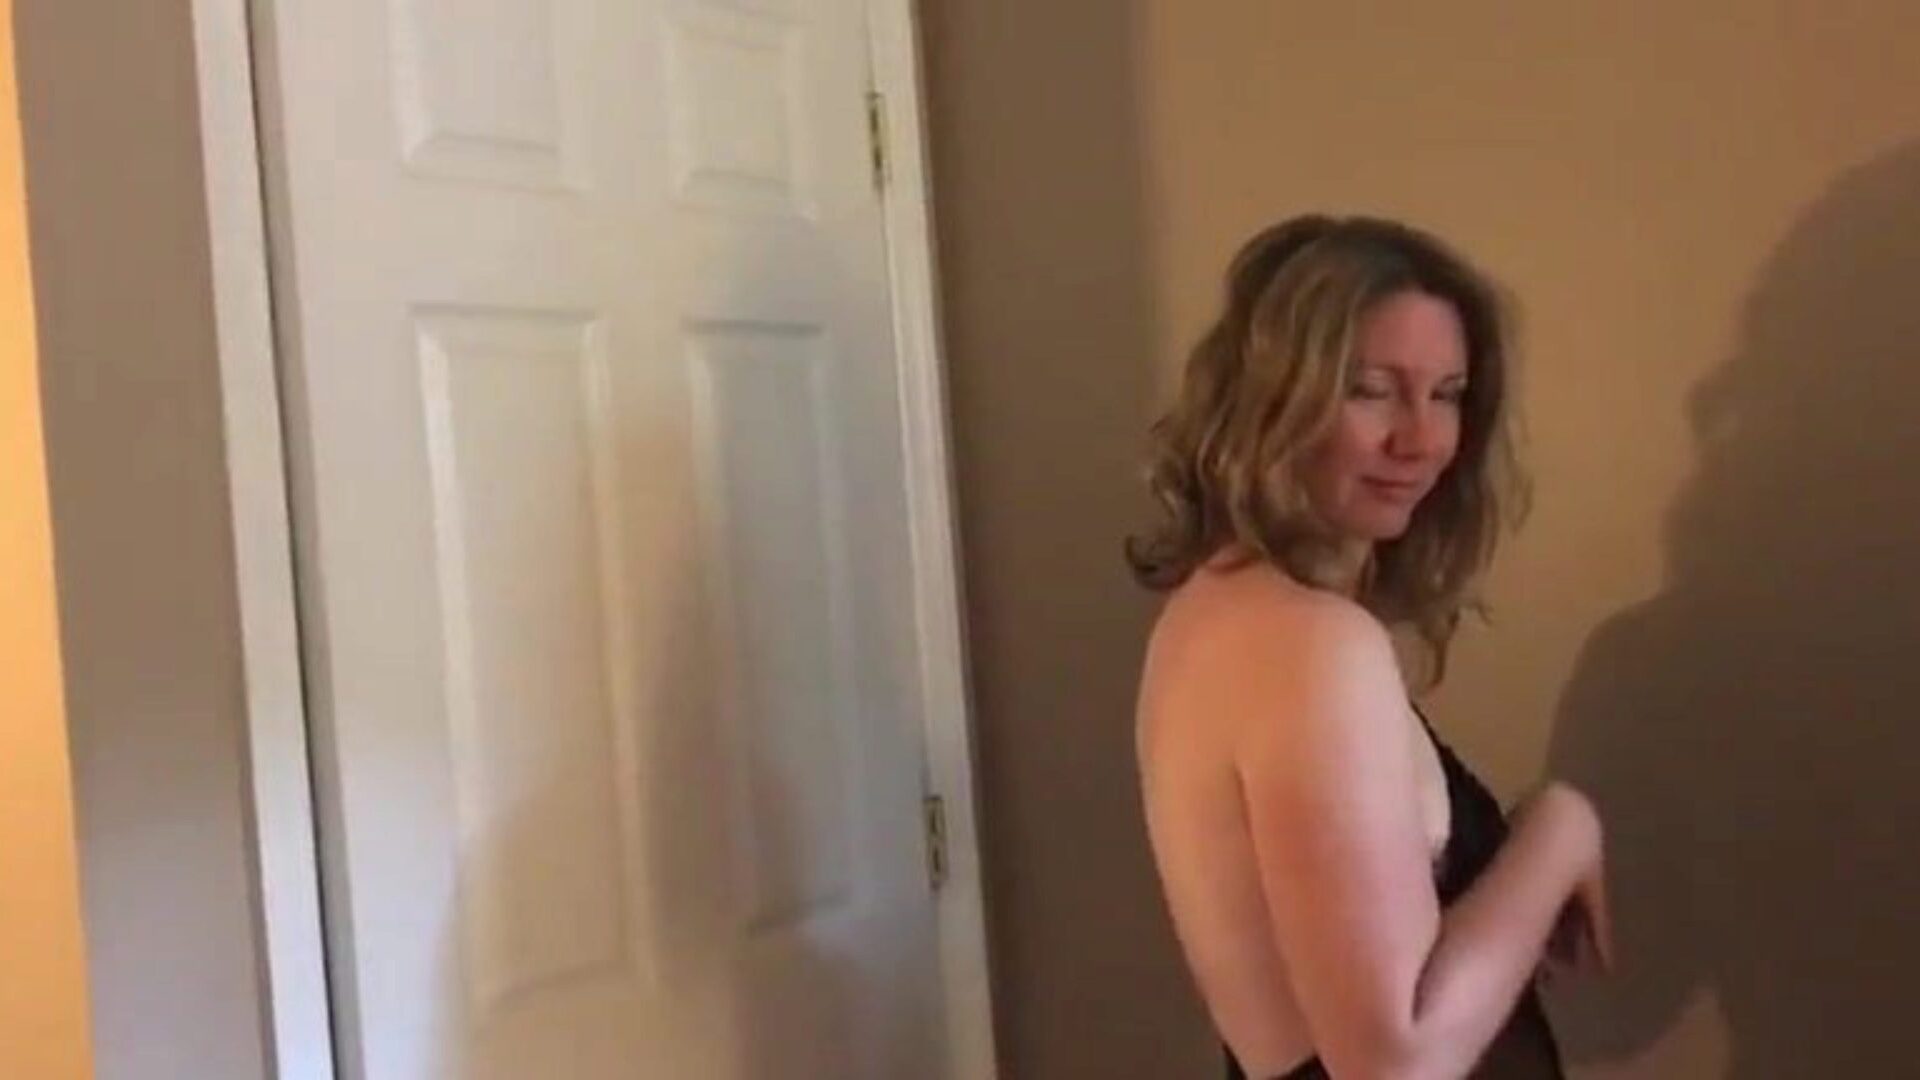 Mom Pleasures Herself, Free Free Mom Pornhub Porn Video 3a | xHamster Watch Mom Pleasures Herself video on xHamster, the huge sex tube site with tons of free-for-all Free Mom Pornhub & Mobile Tube Mom porn videos